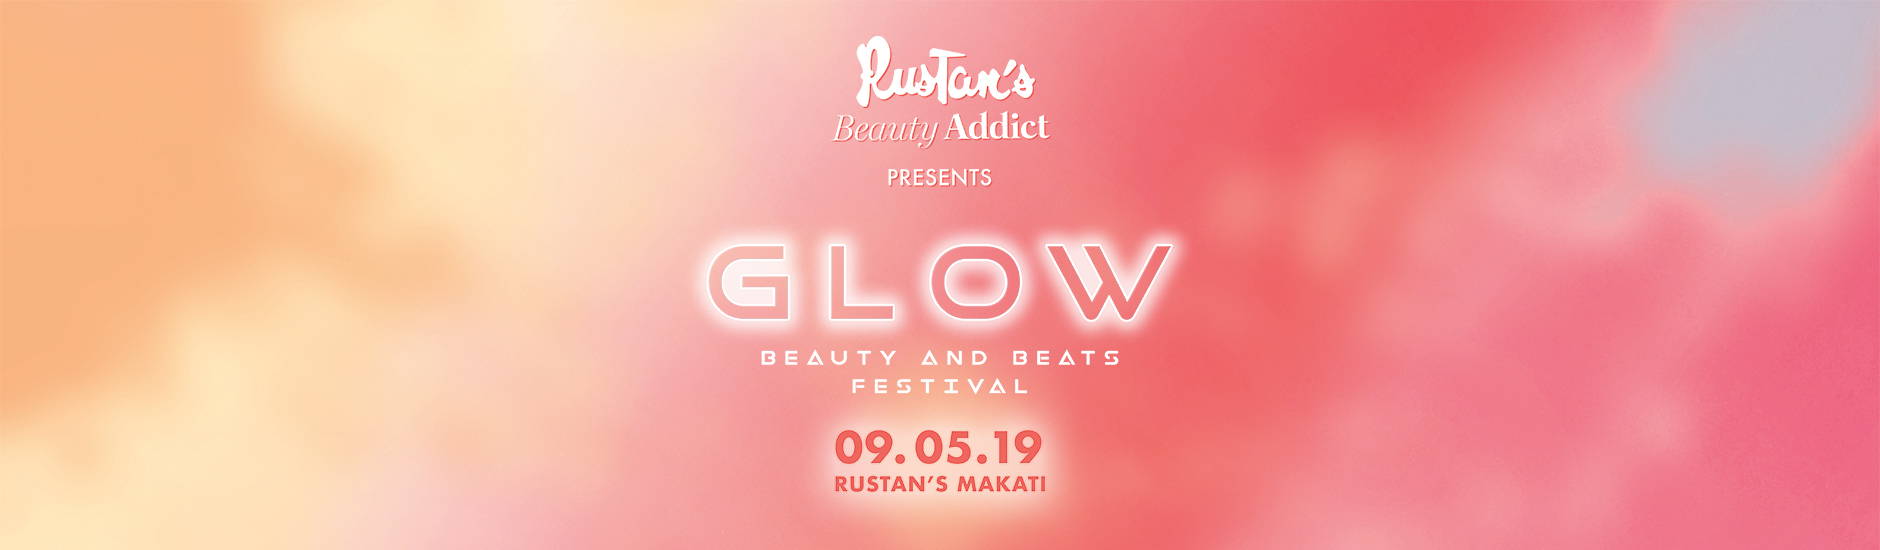 Rustan's Beauty Addict is Back: Introducing the GLOW Beauty and Beats Festival